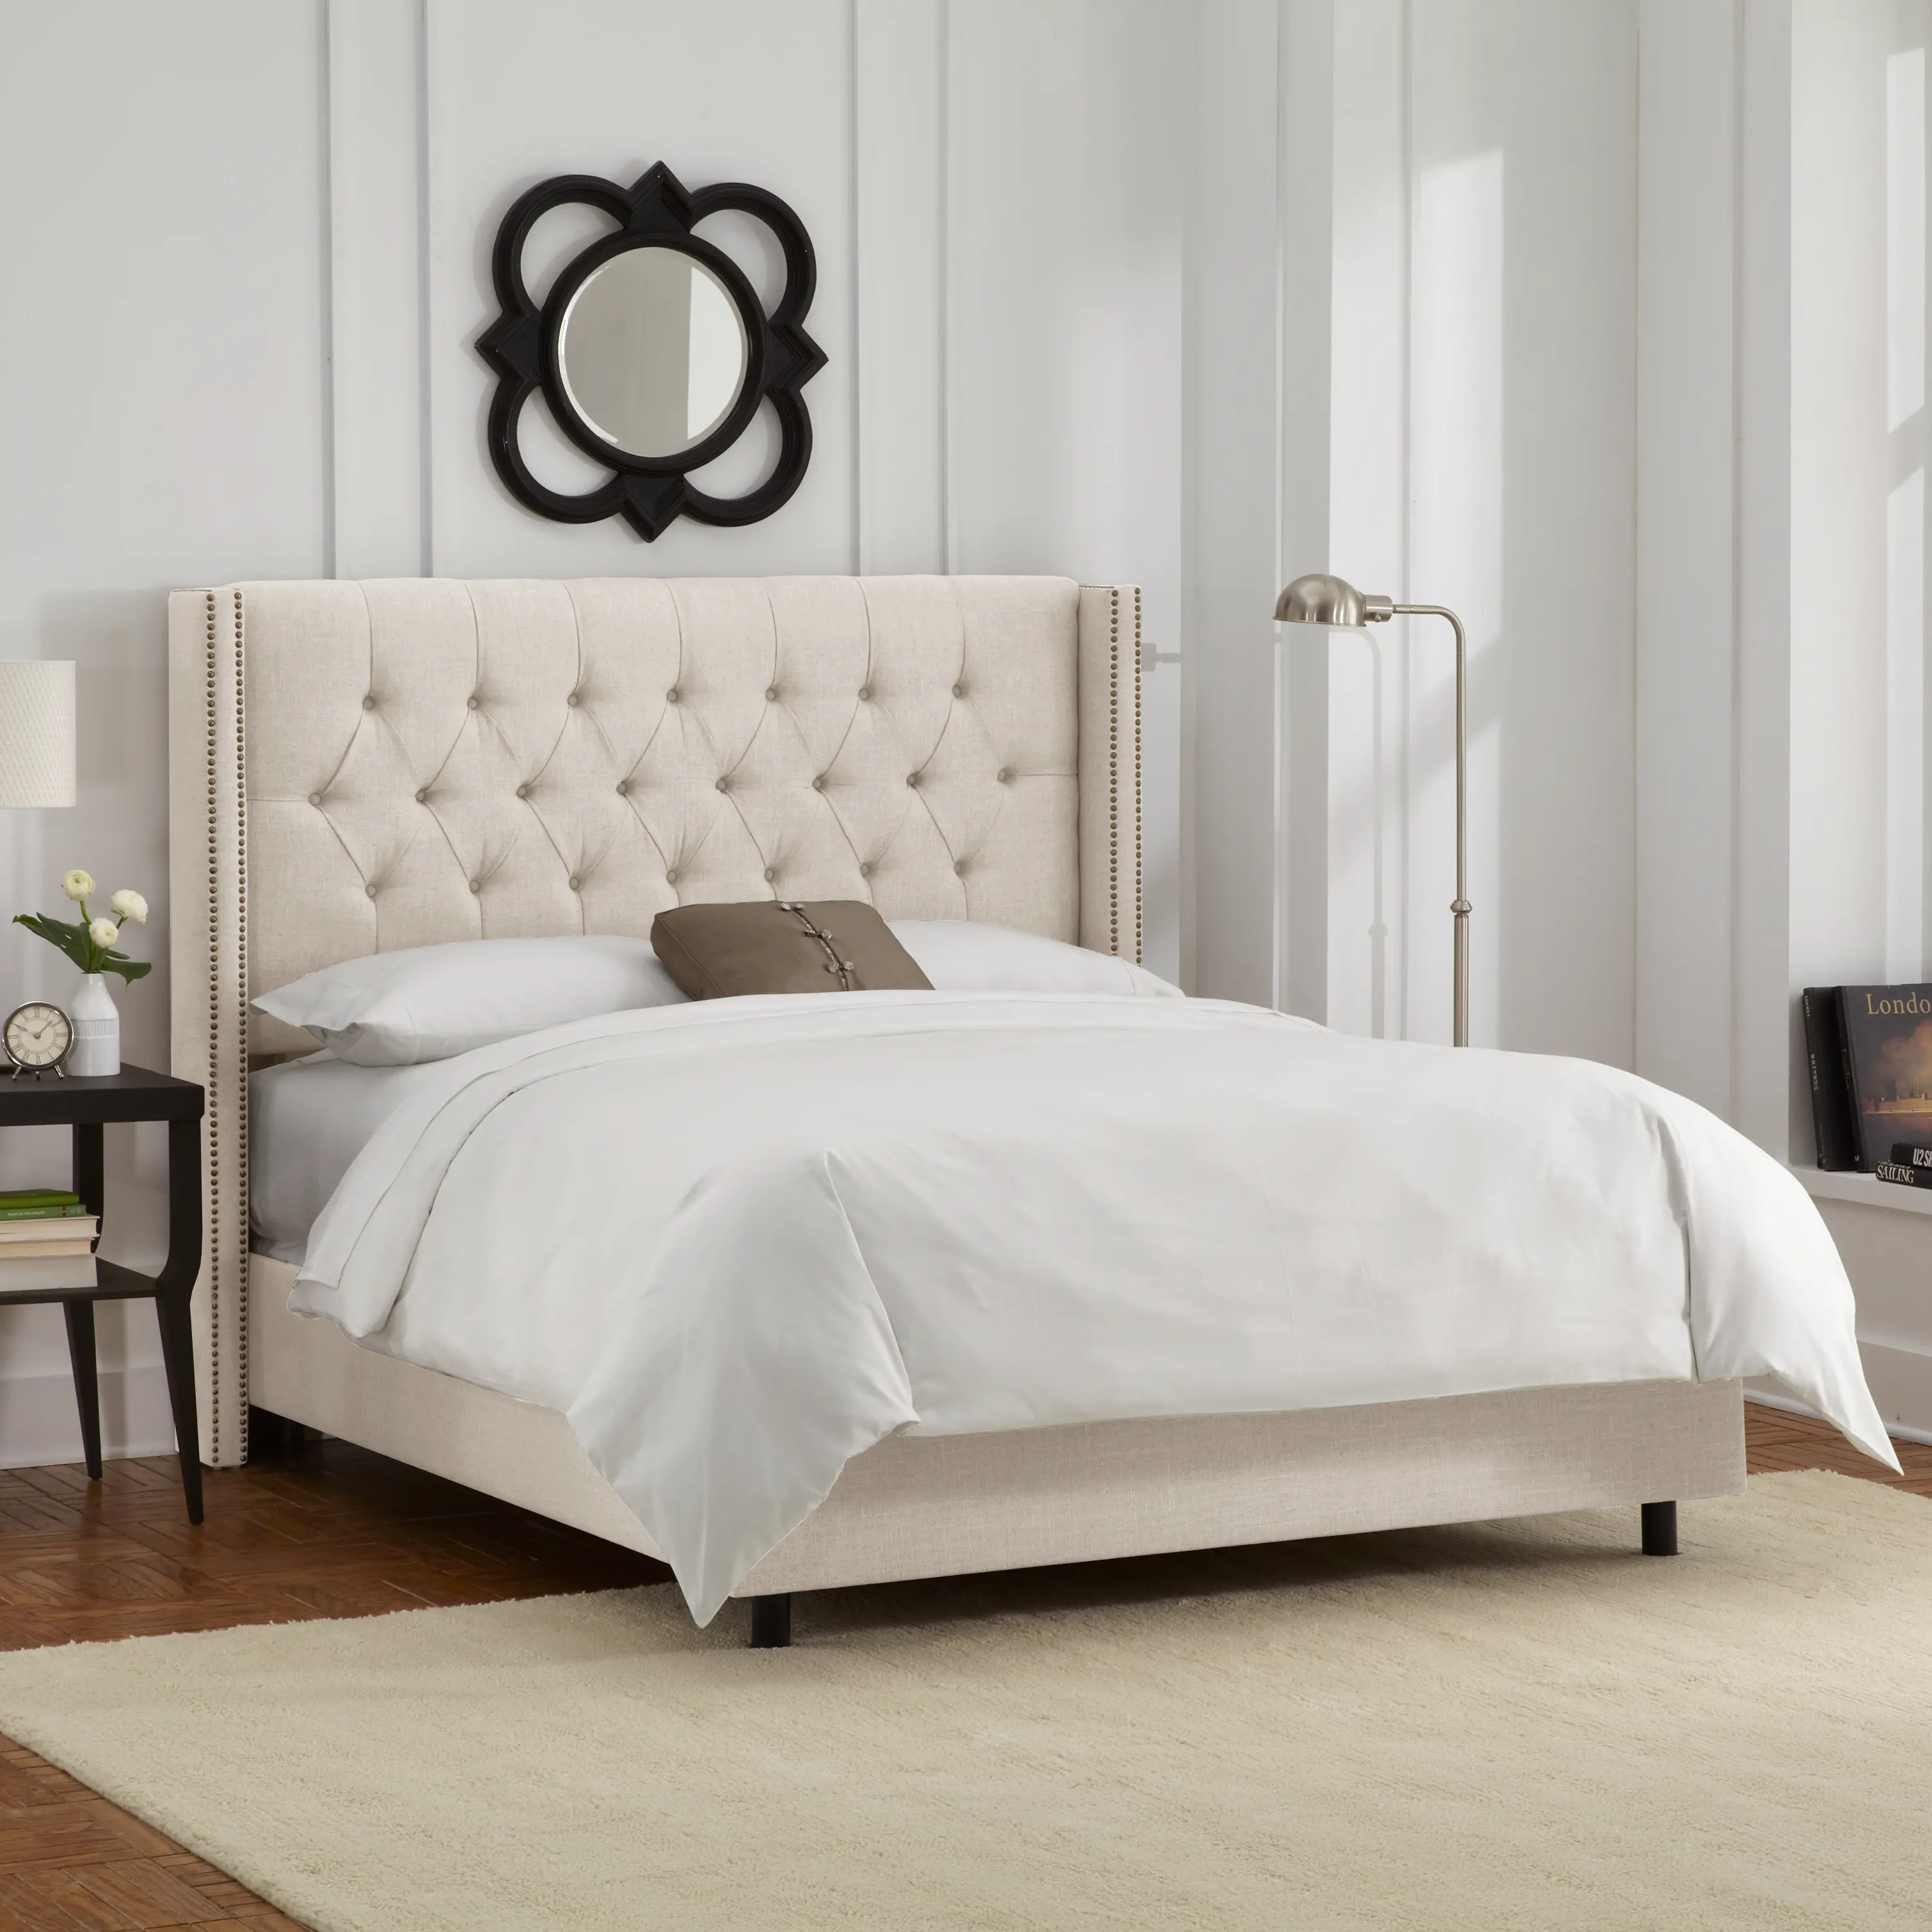 142NBBED-BRLNNTLC Abigail Ivory Diamond Tufted Wingback Queen Bed -  sku 142NBBED-BRLNNTLC